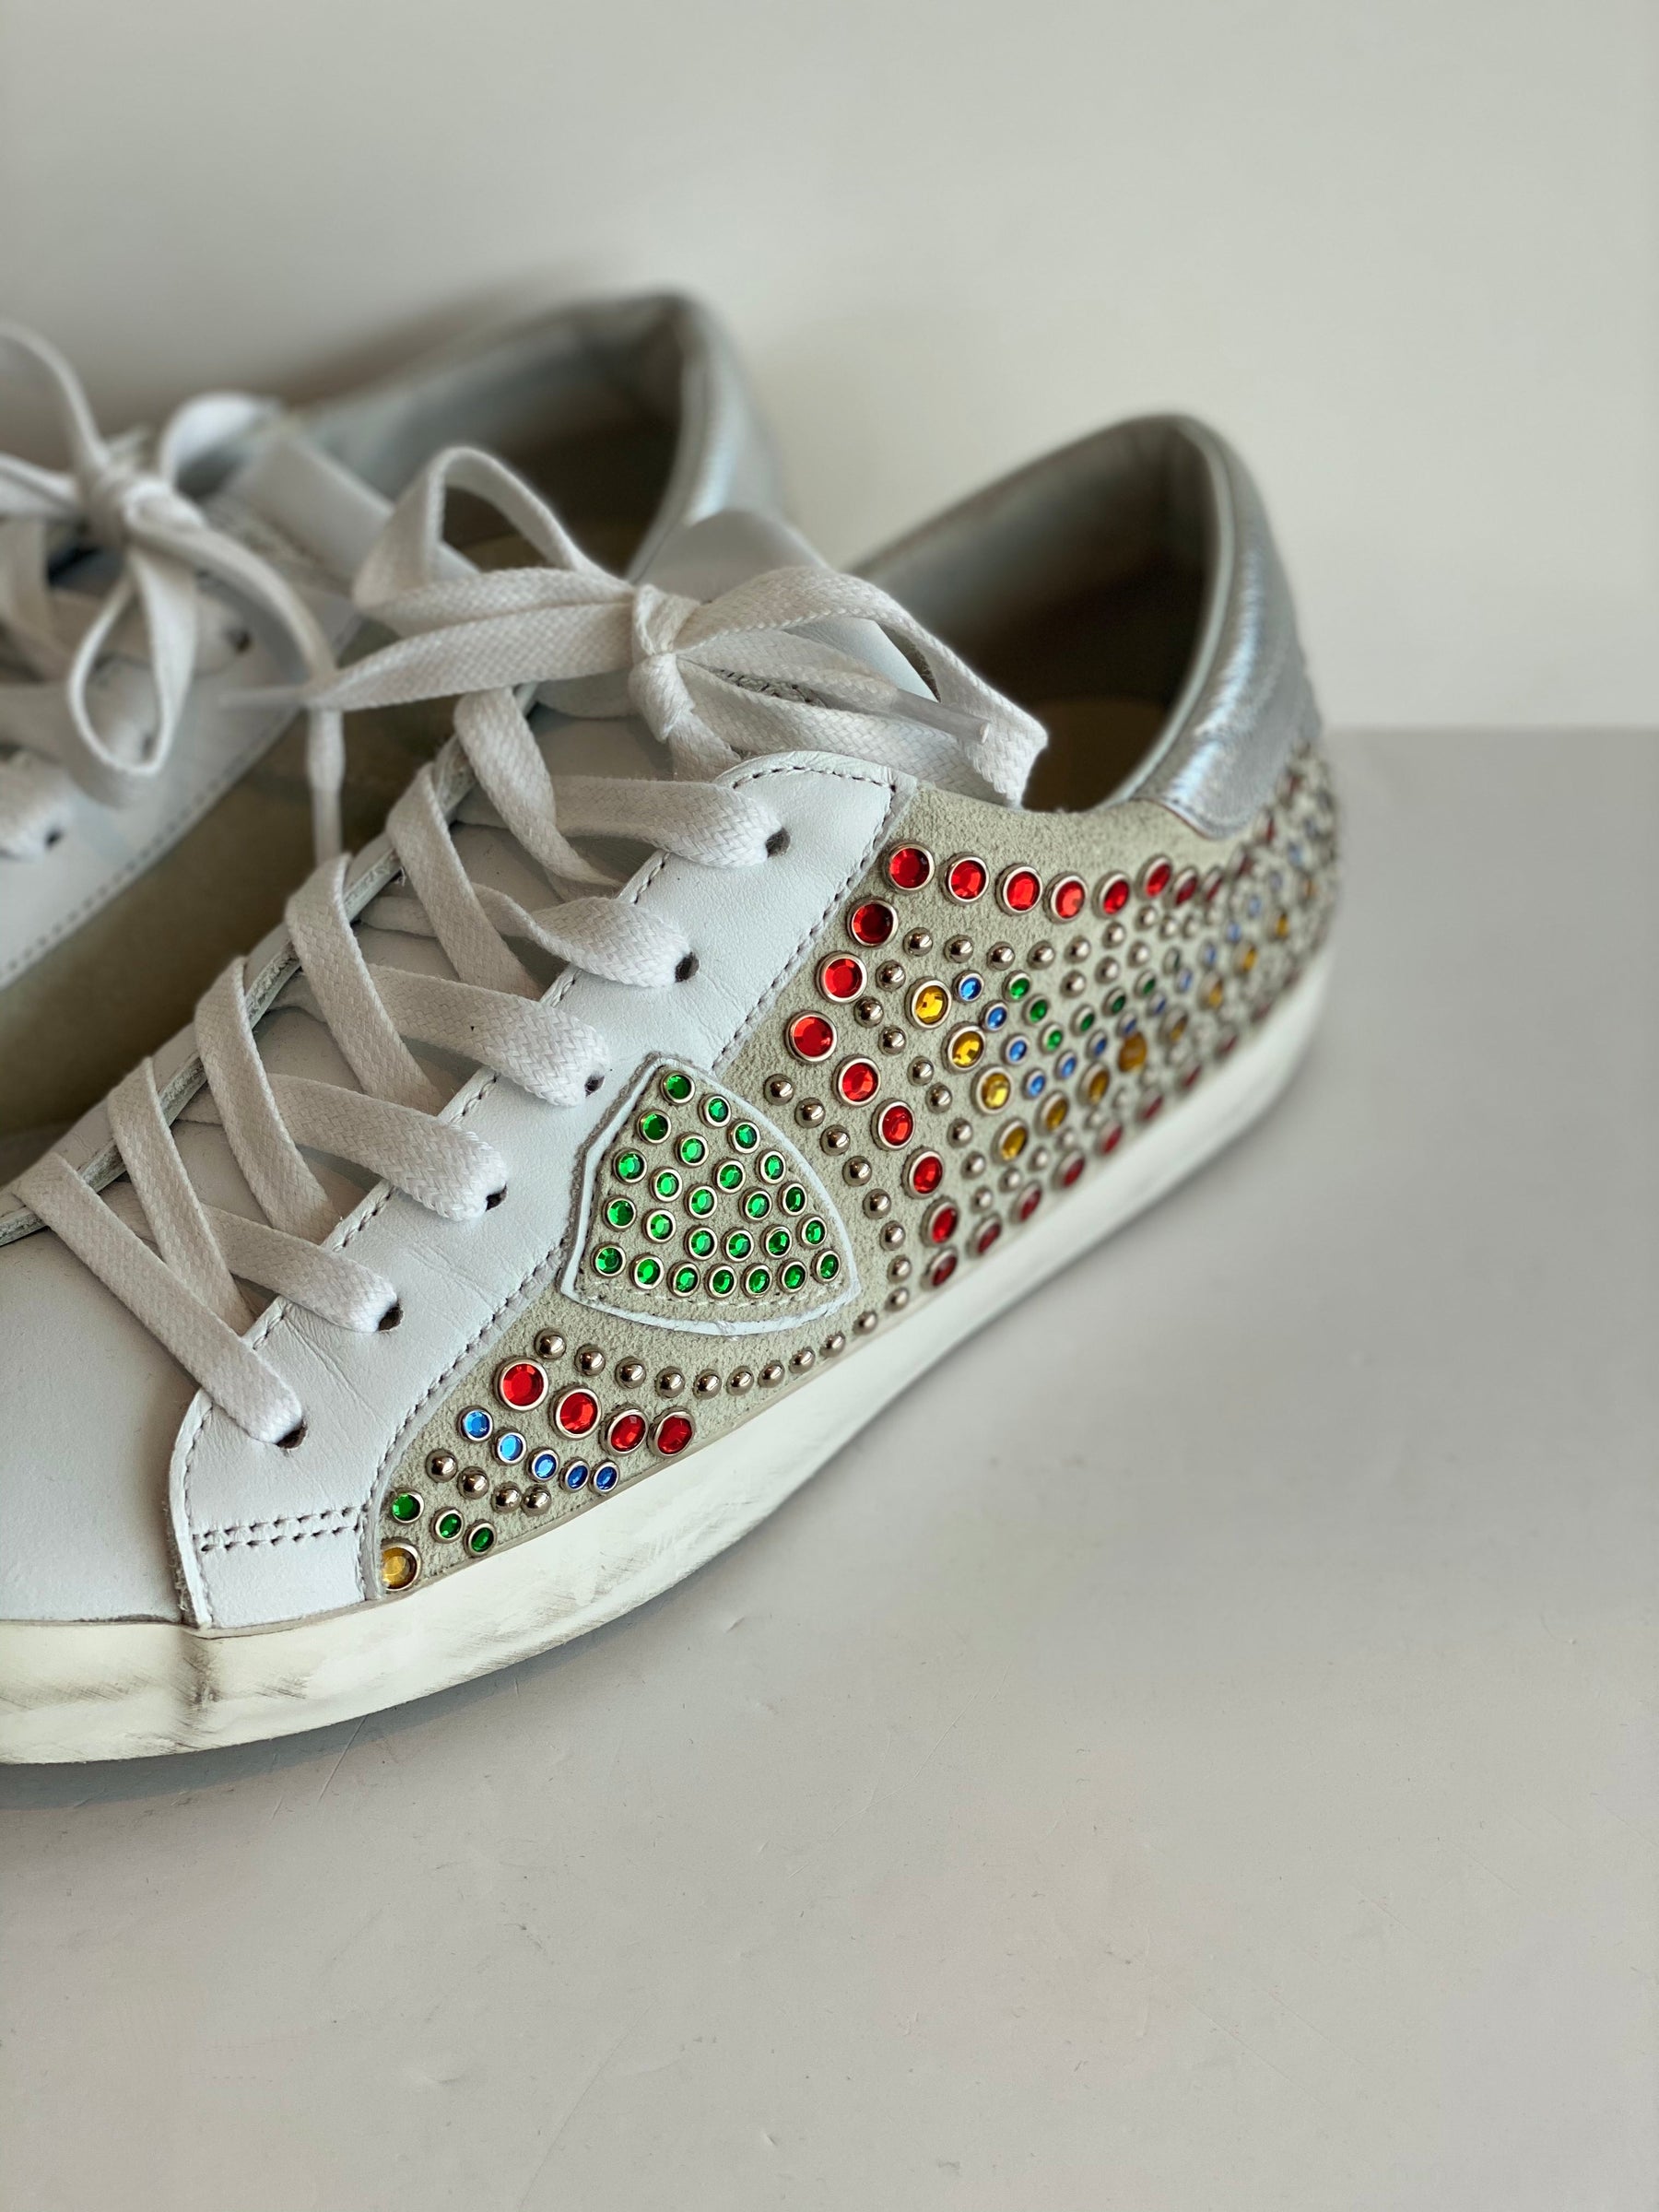 Philippe Model Carioca Jules Blanc Multicolor Sneakers Side of Shoes